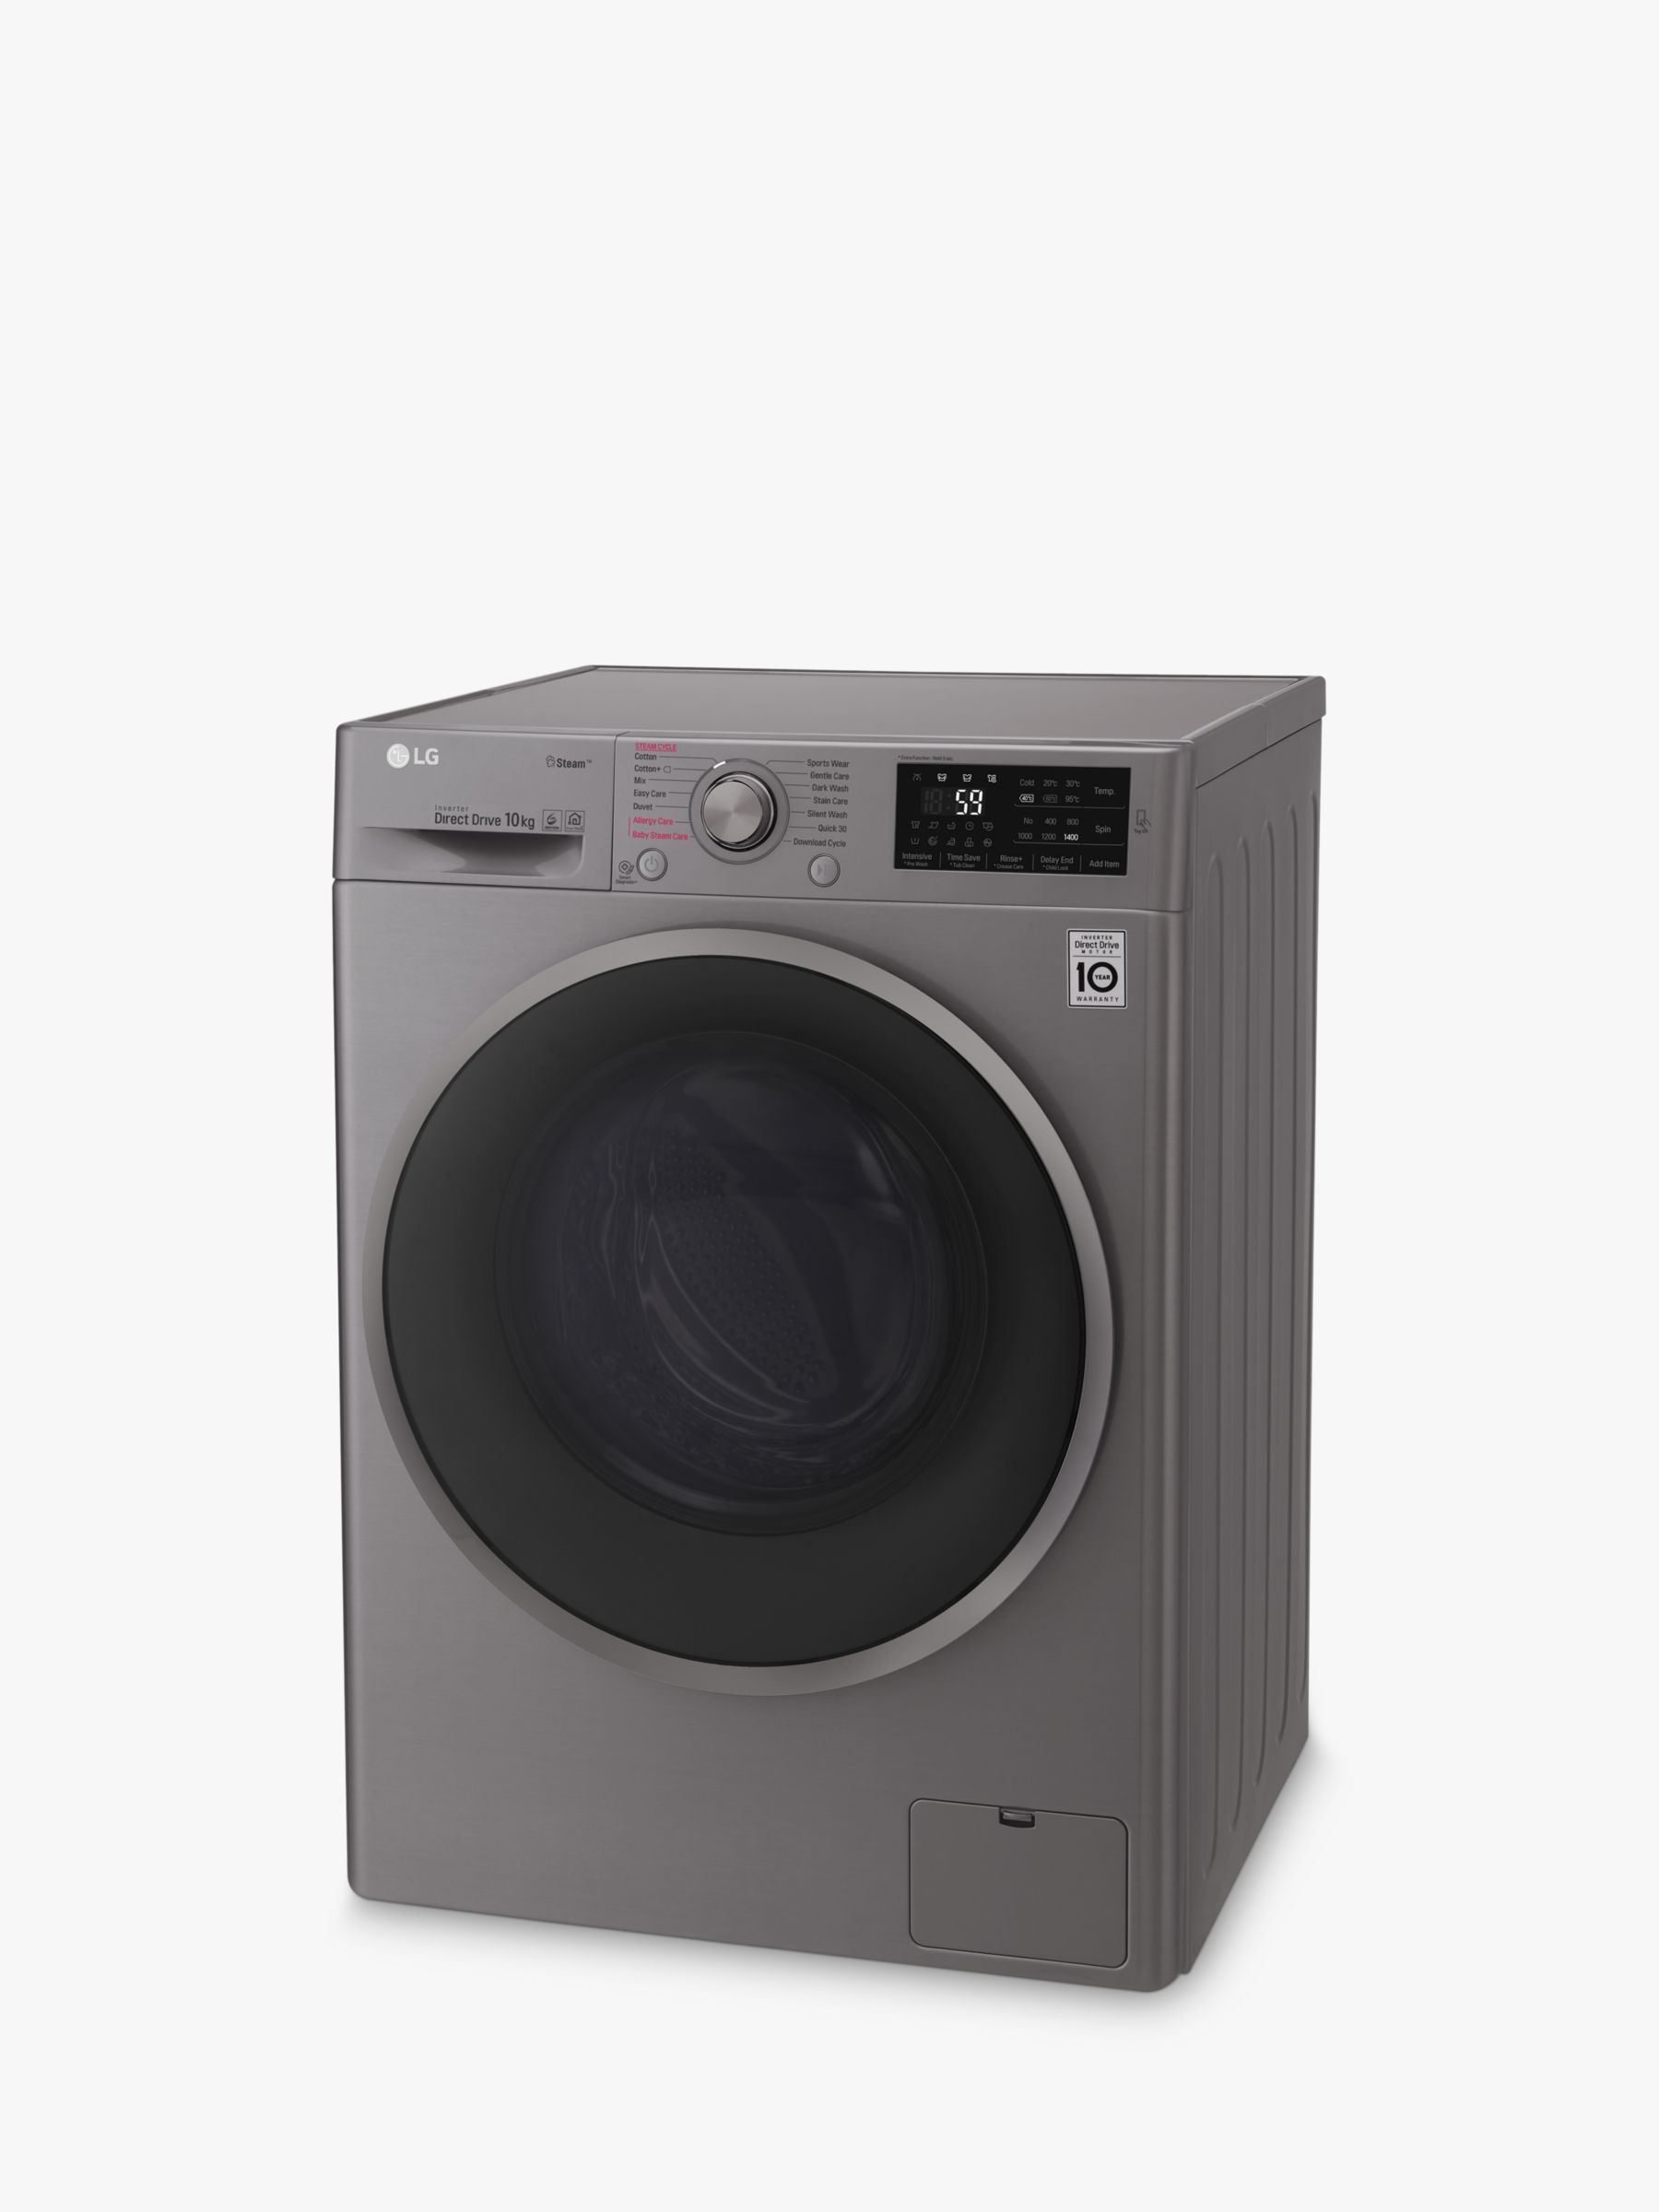 LG F4J610SS Freestanding Washing Machine, 10kg Load, A+++ Energy Rating, Spin, Graphite